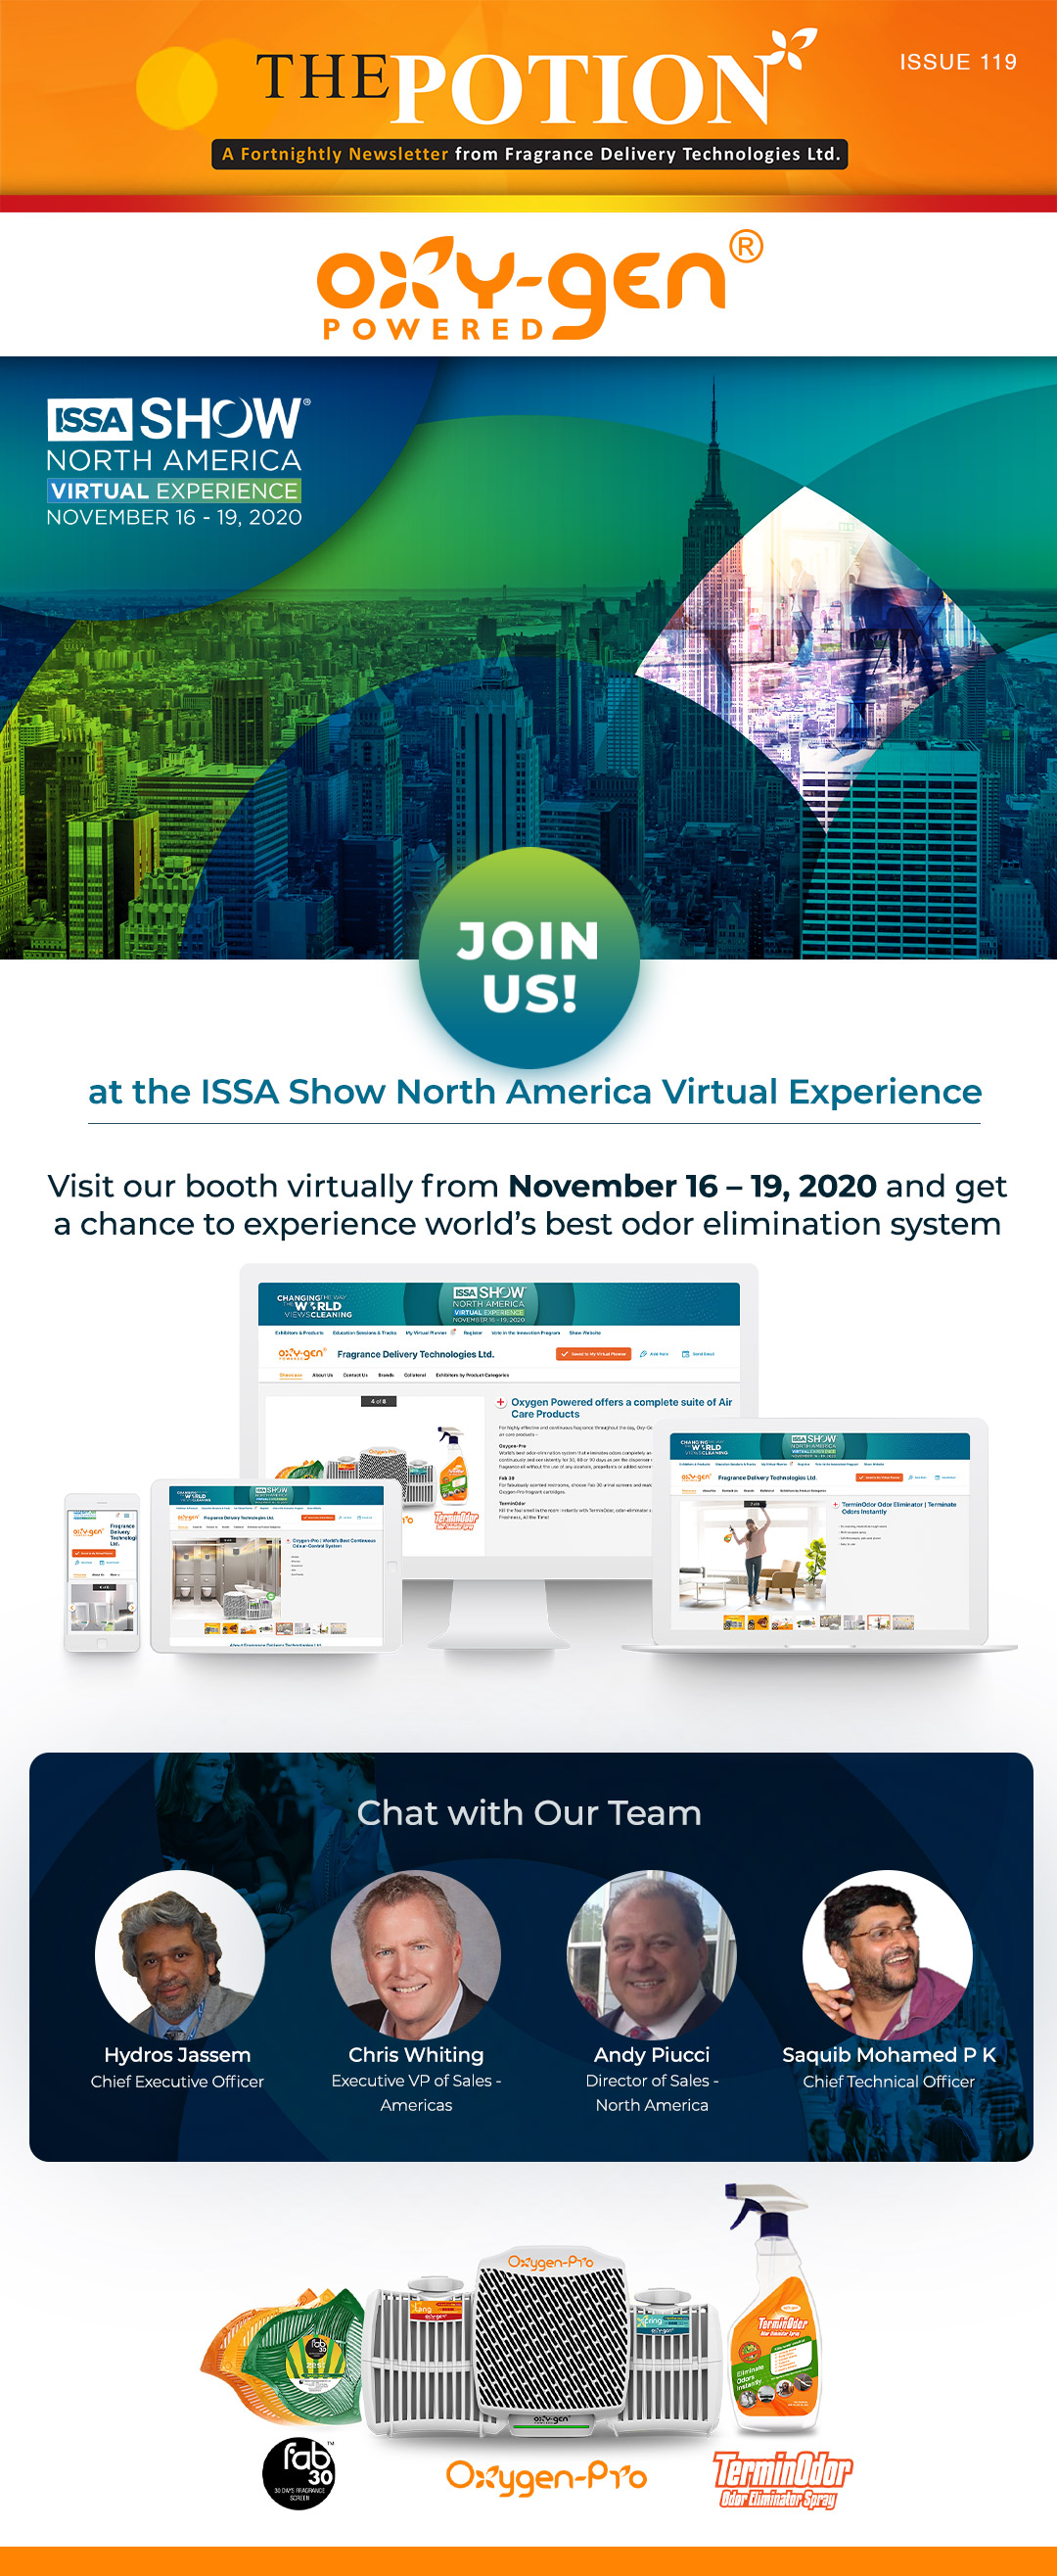 Visit Oxy-Gen Powered booth at the ISSA Virtual Show | Nov 16-19, 2020 - The Potion Issue 119